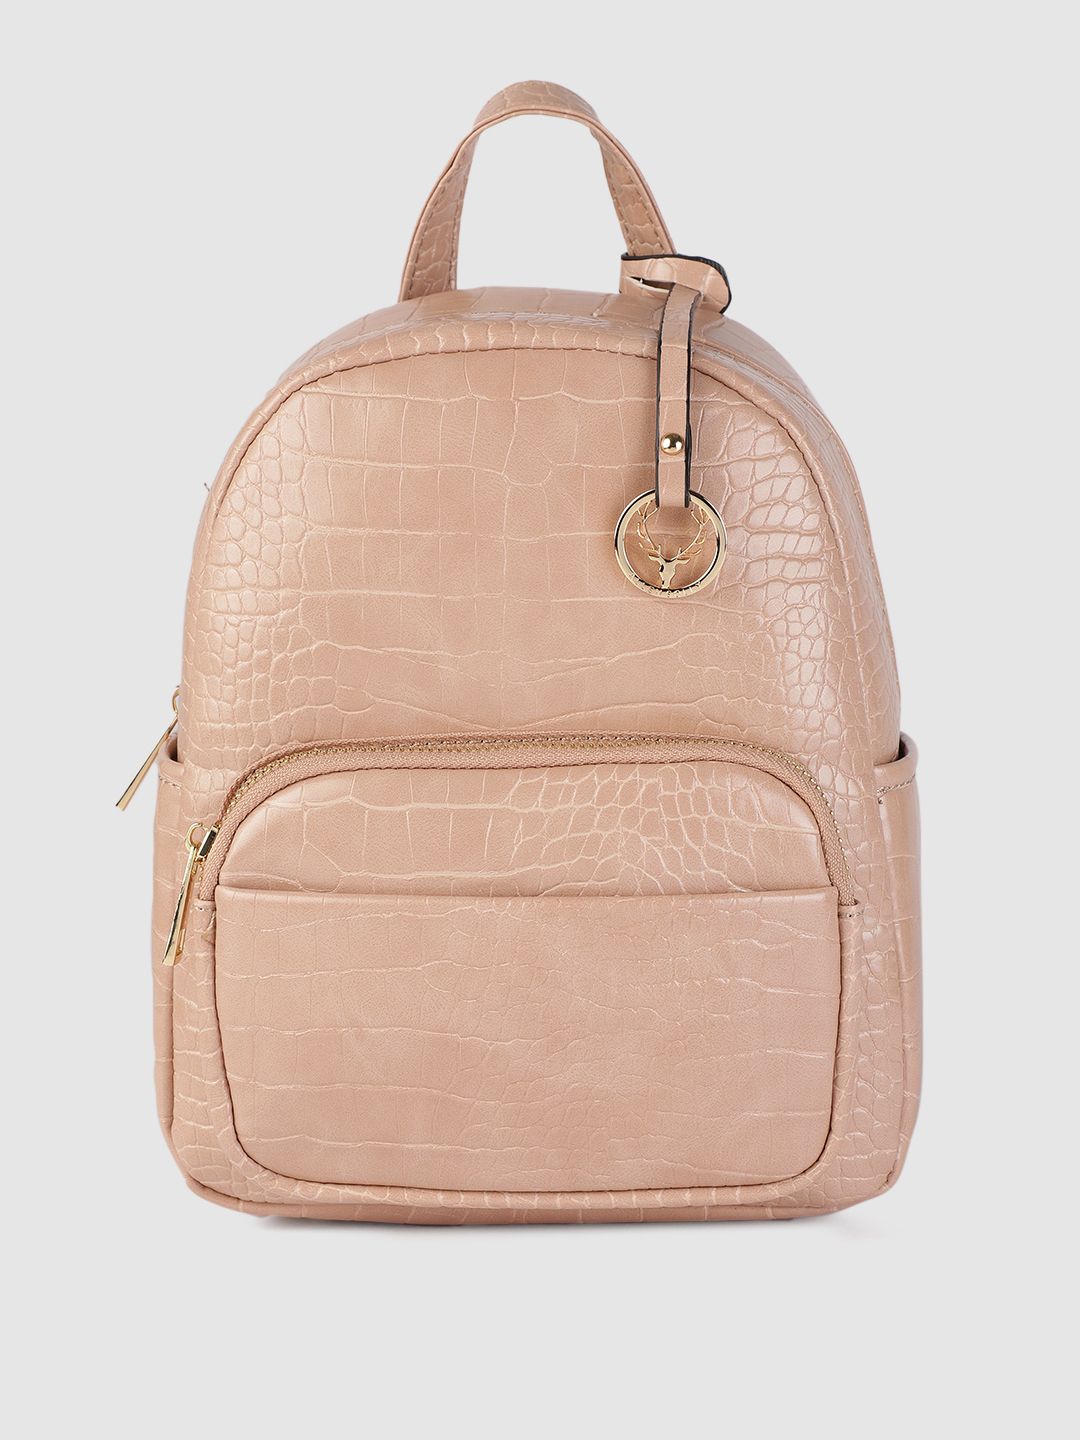 Allen Solly Women Dusty Pink Animal Textured Backpack Price in India